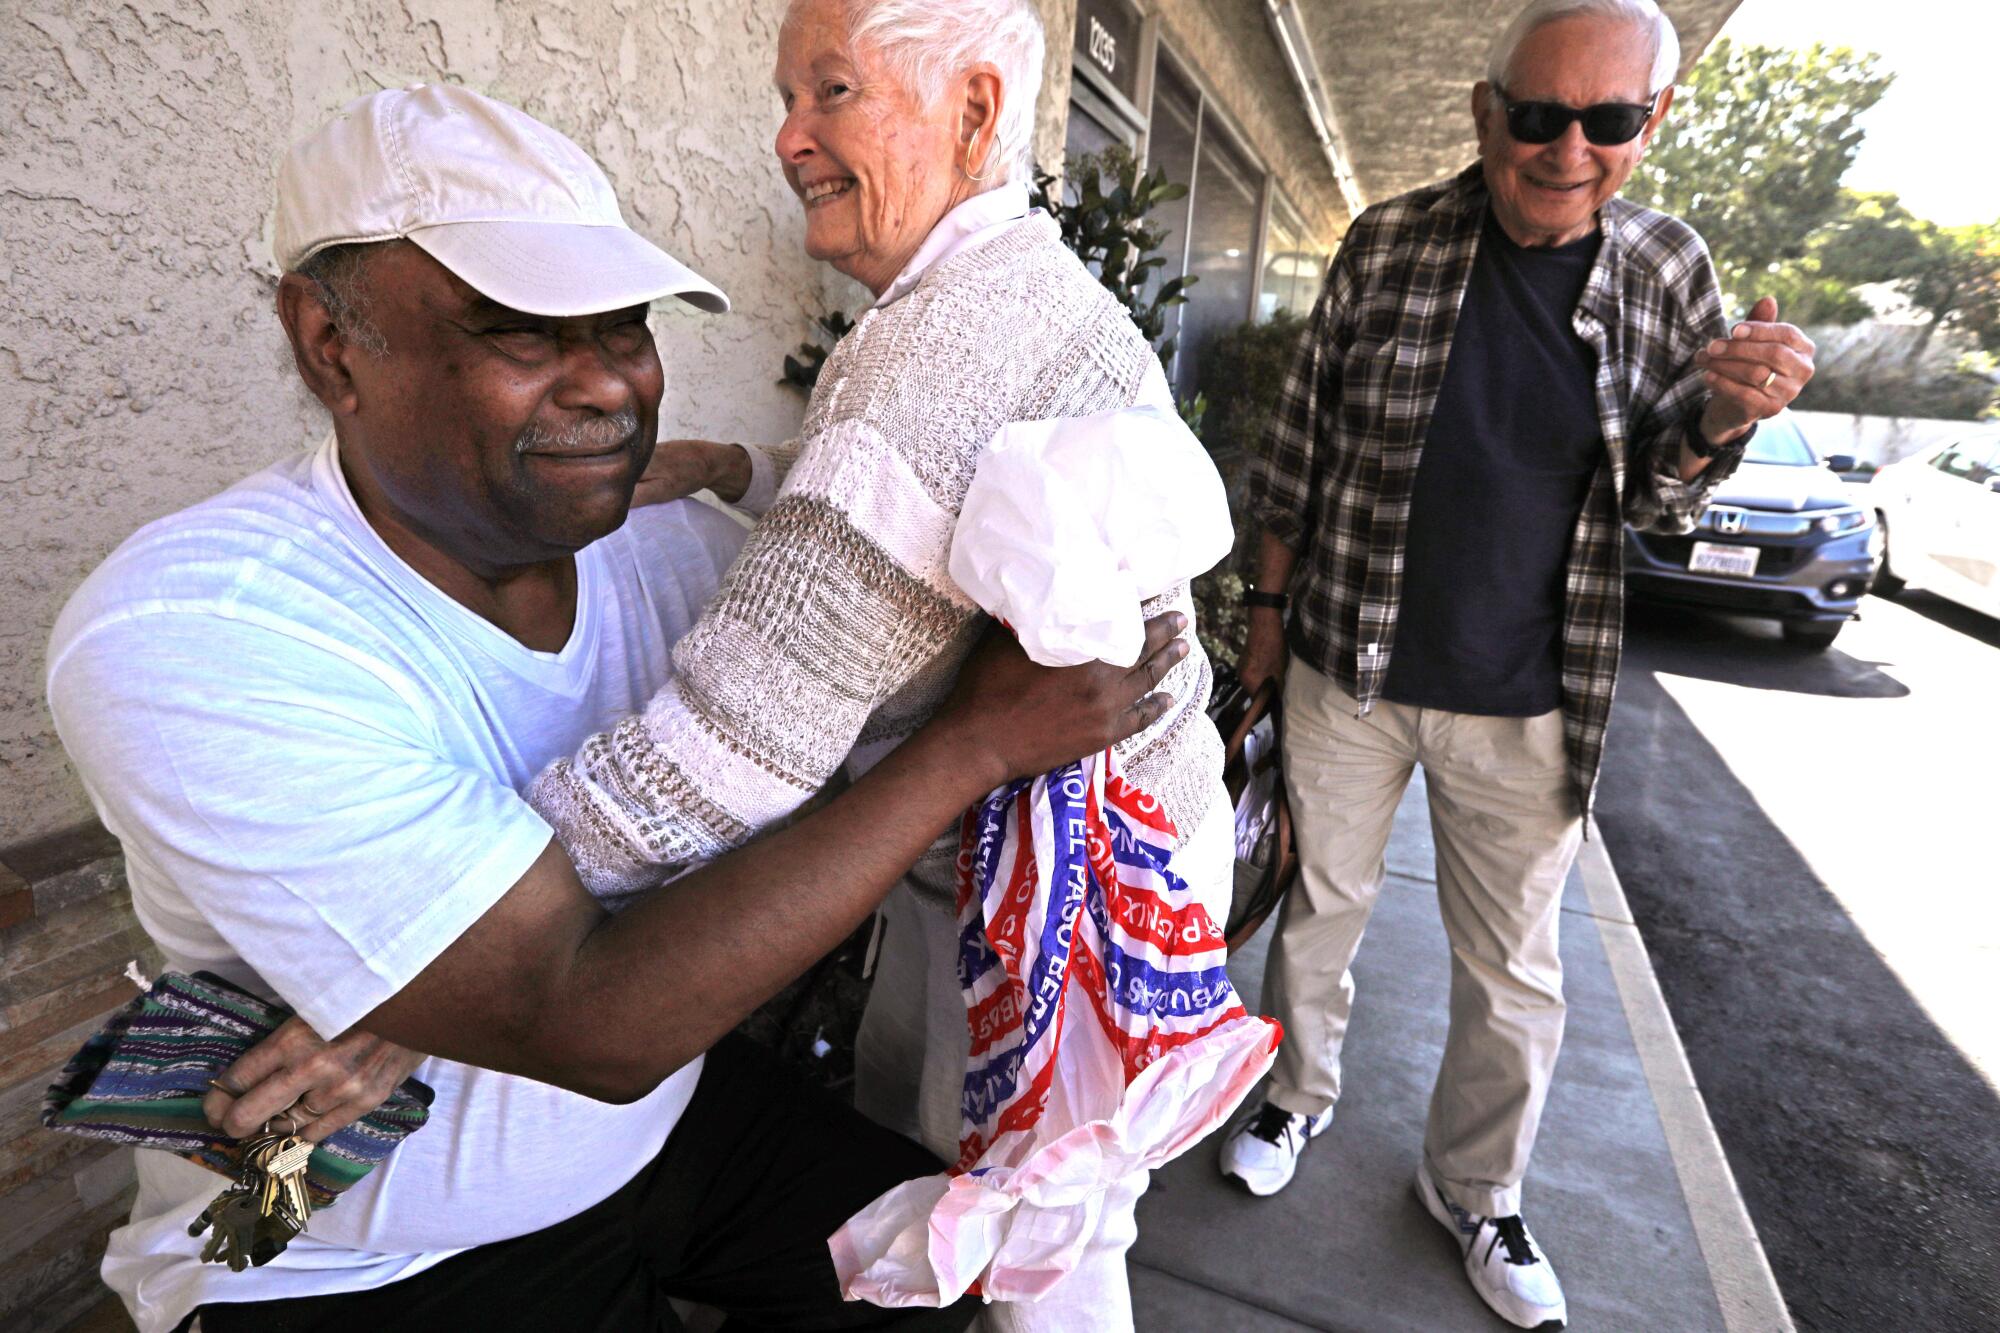 David Mays receives a hug of support from Betty Juarez in West Los Angeles